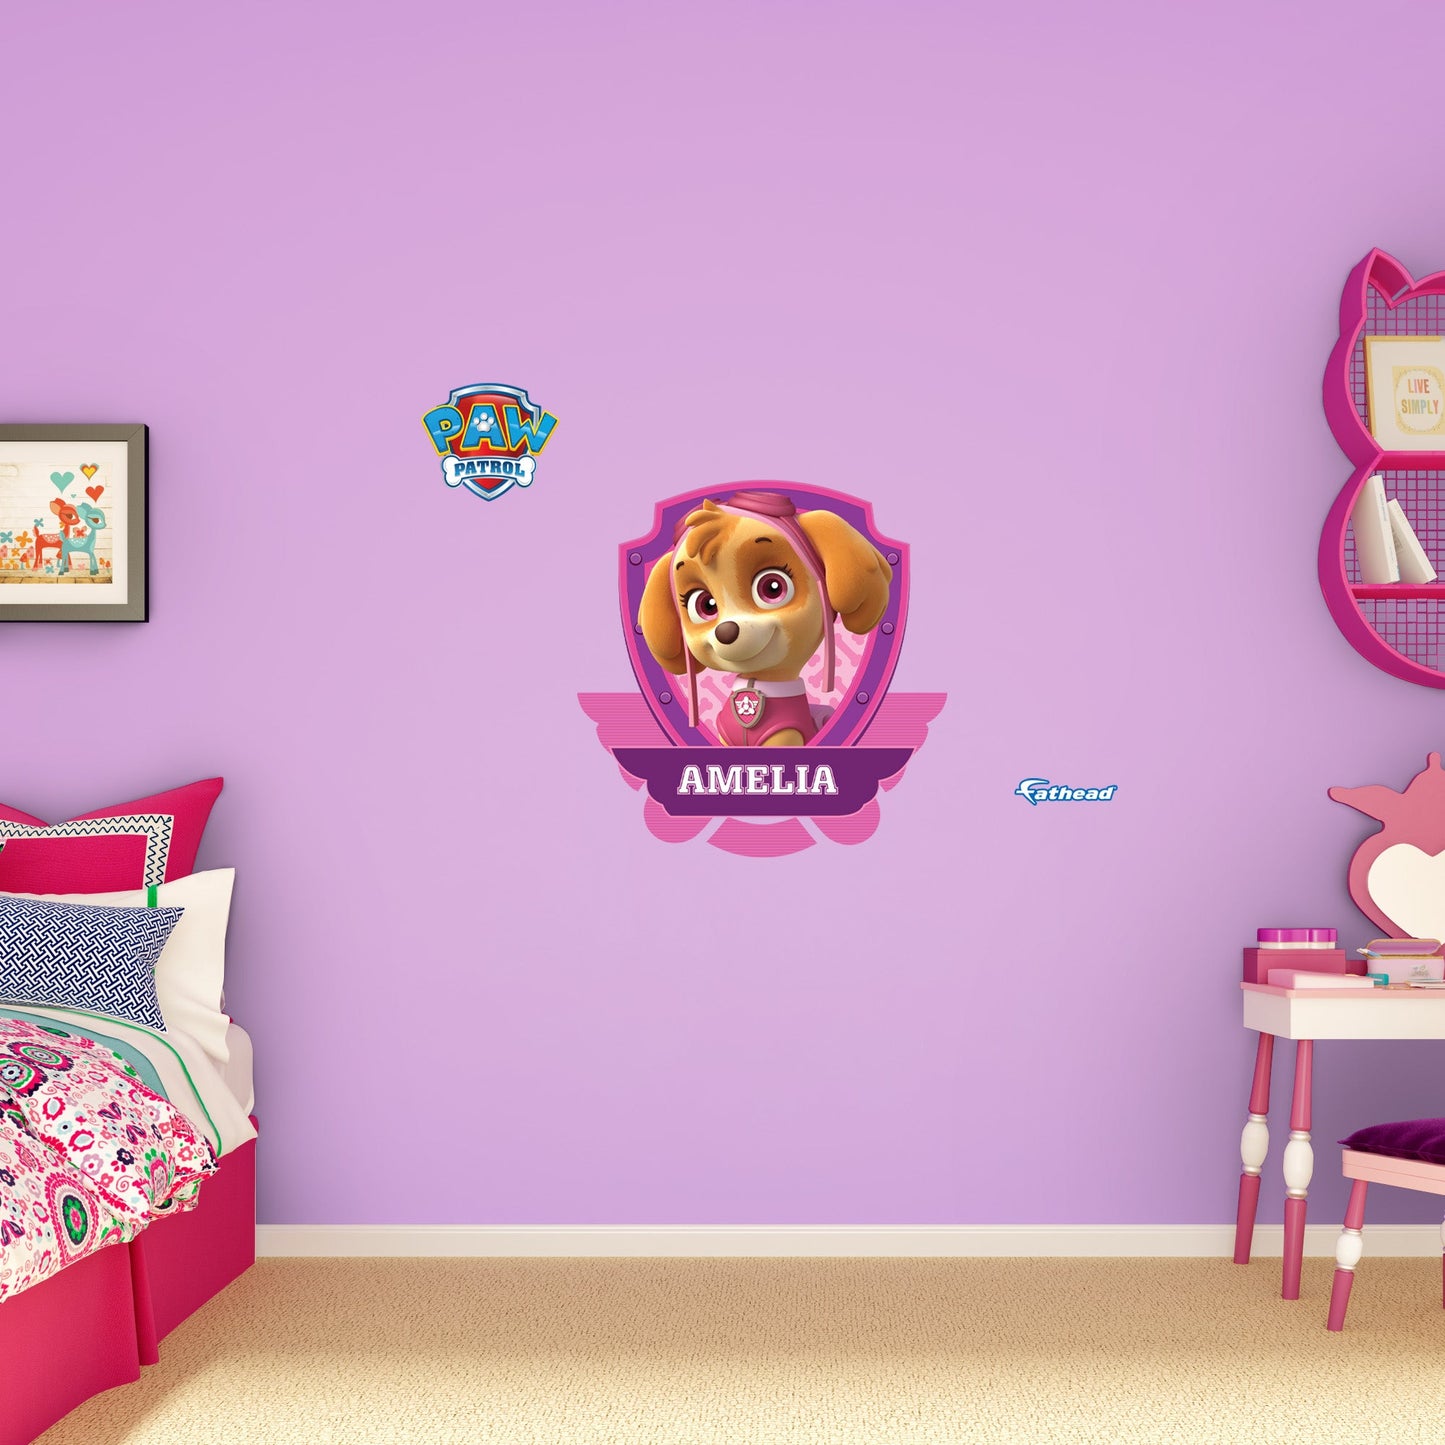 Paw Patrol: Skye Personalized Name Icon - Officially Licensed Nickelodeon Removable Adhesive Decal